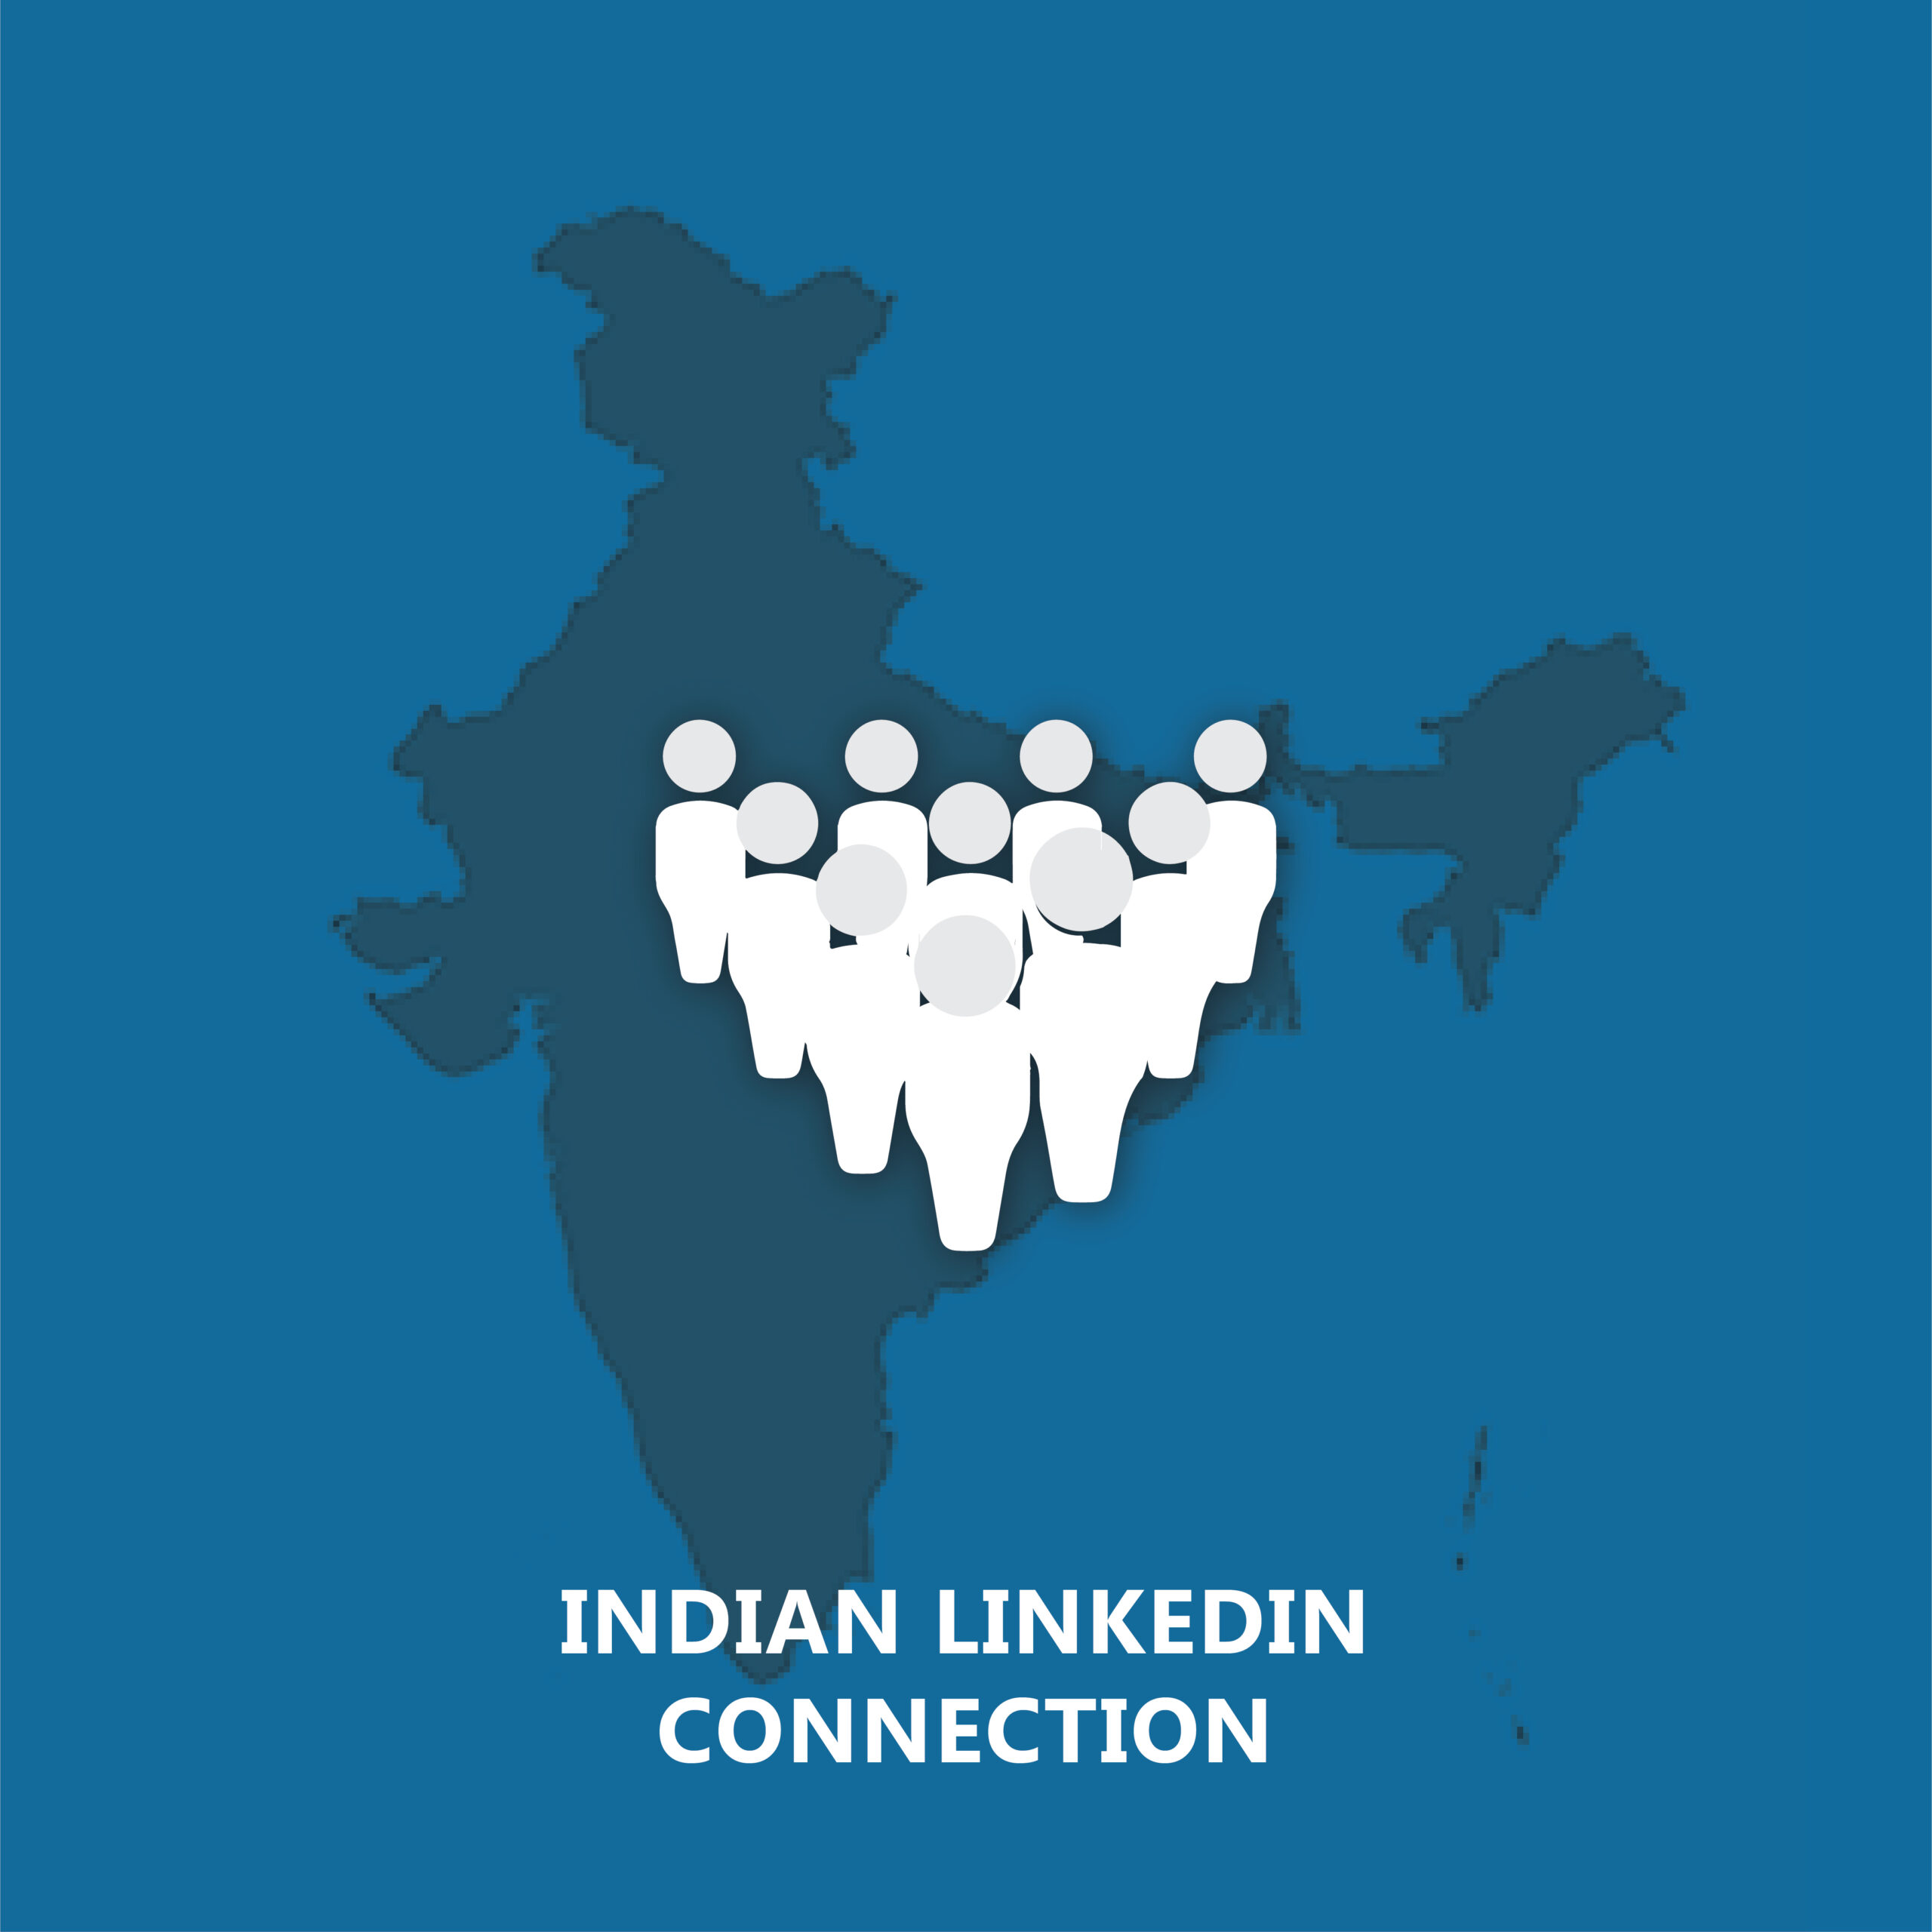 Indian LinkedIn Connection